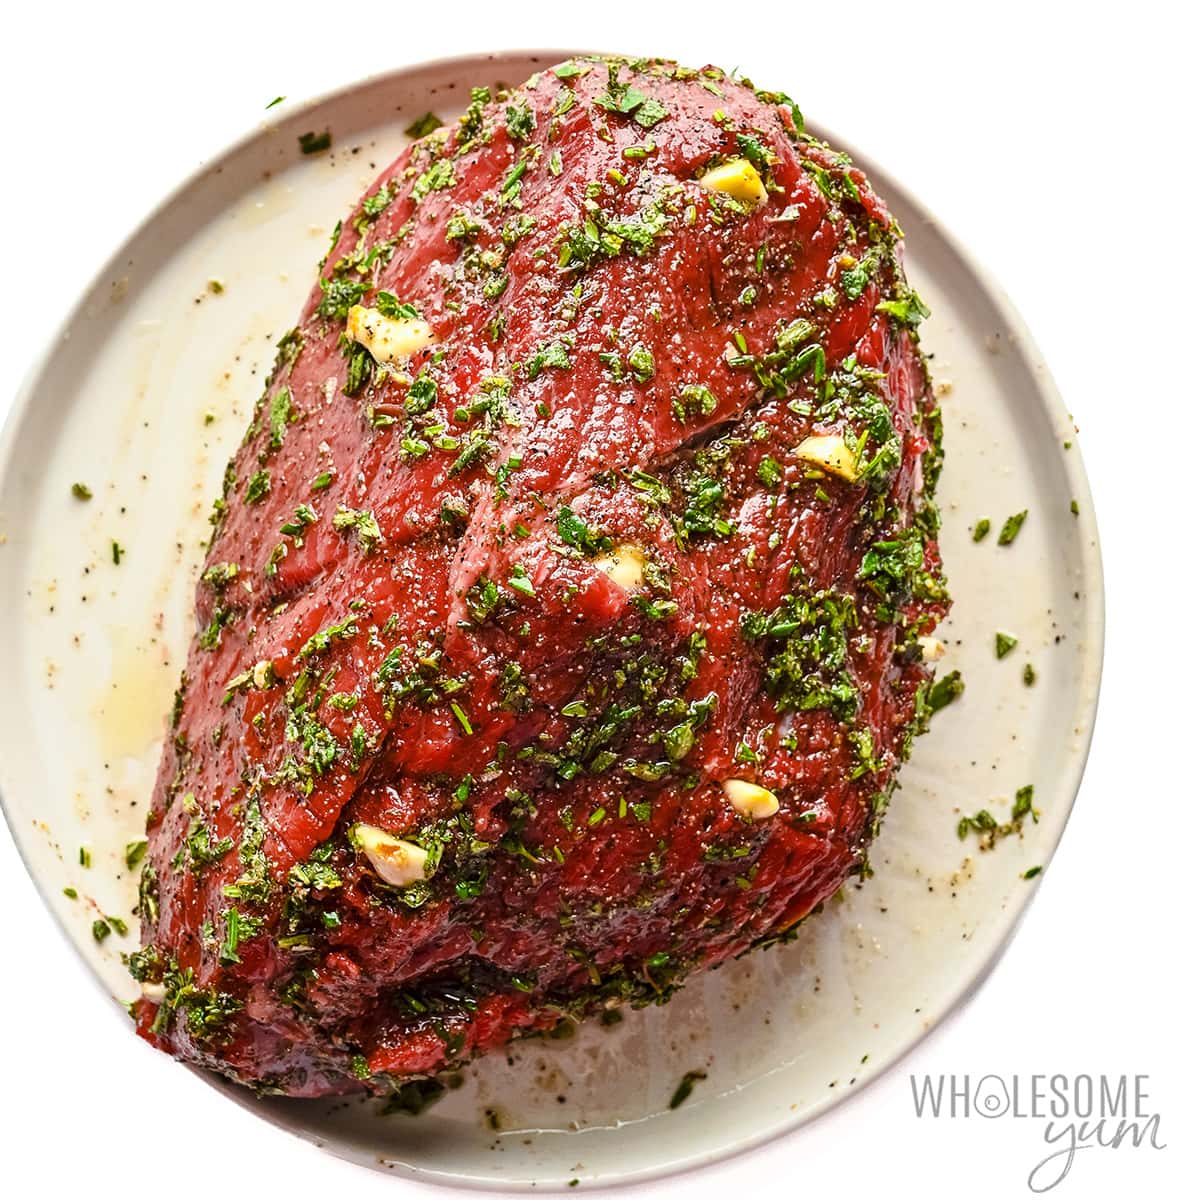 Rub the herb and oil mixture all over the rump roast.